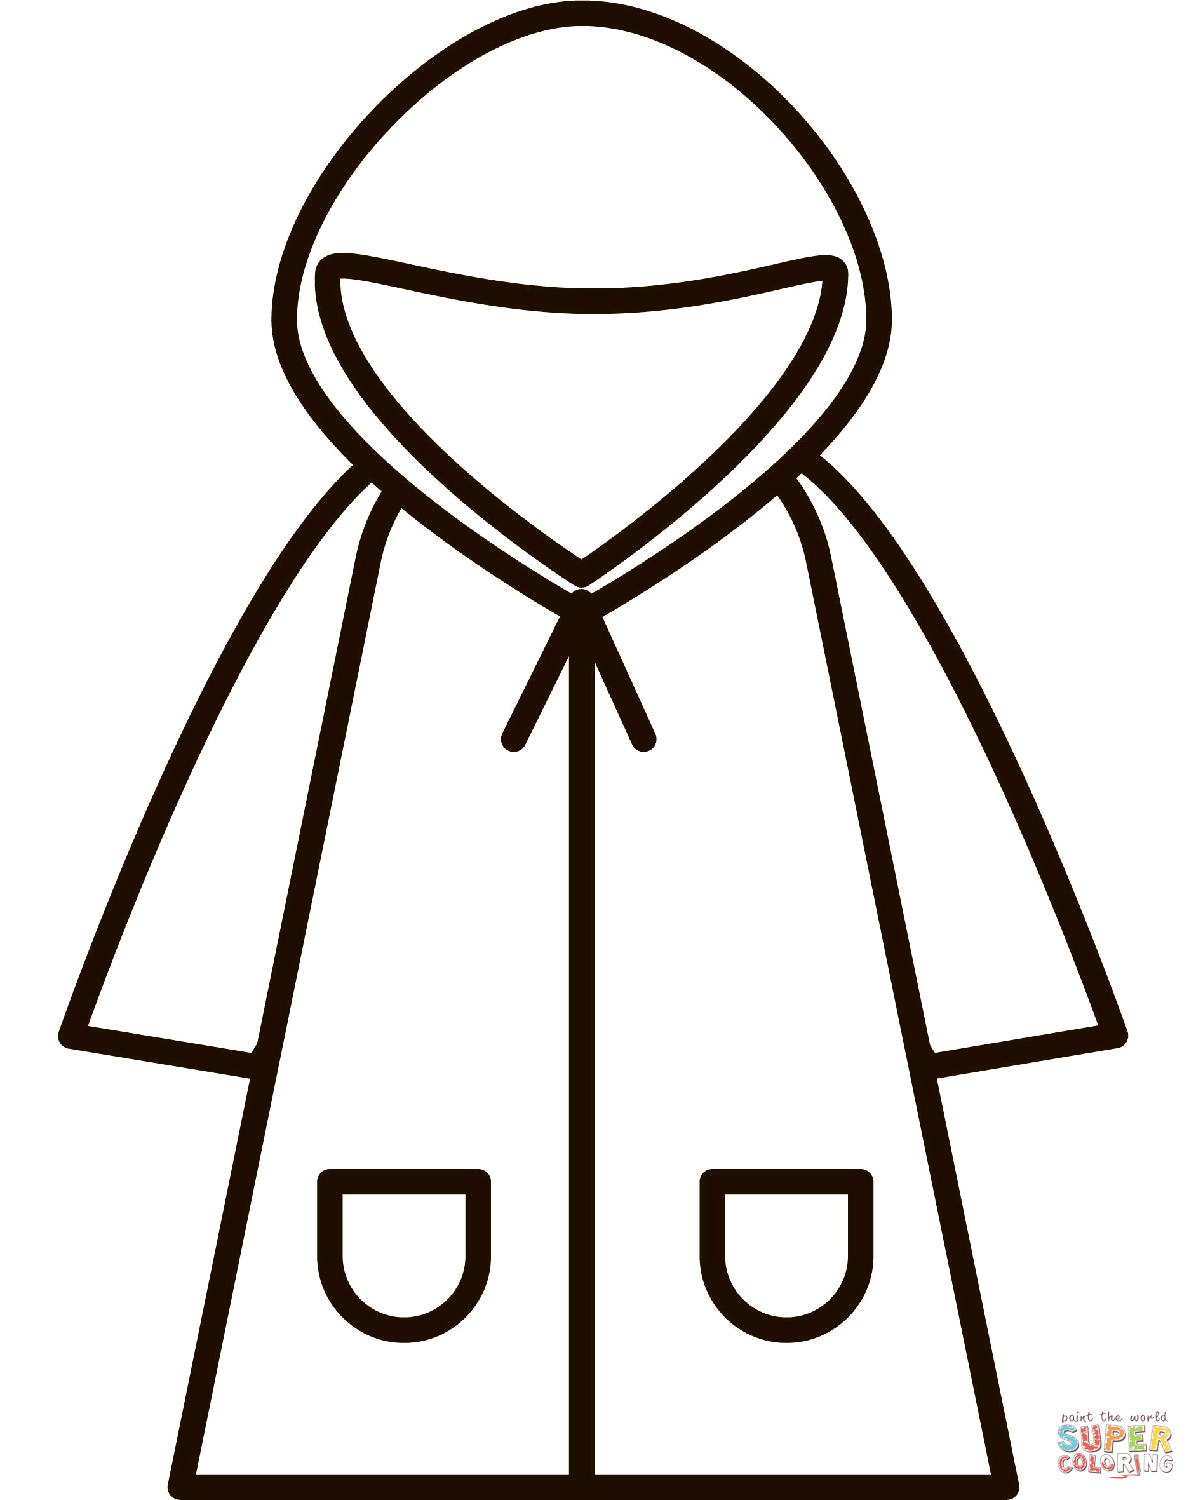 raincoat-coloring-pages-coloring-home